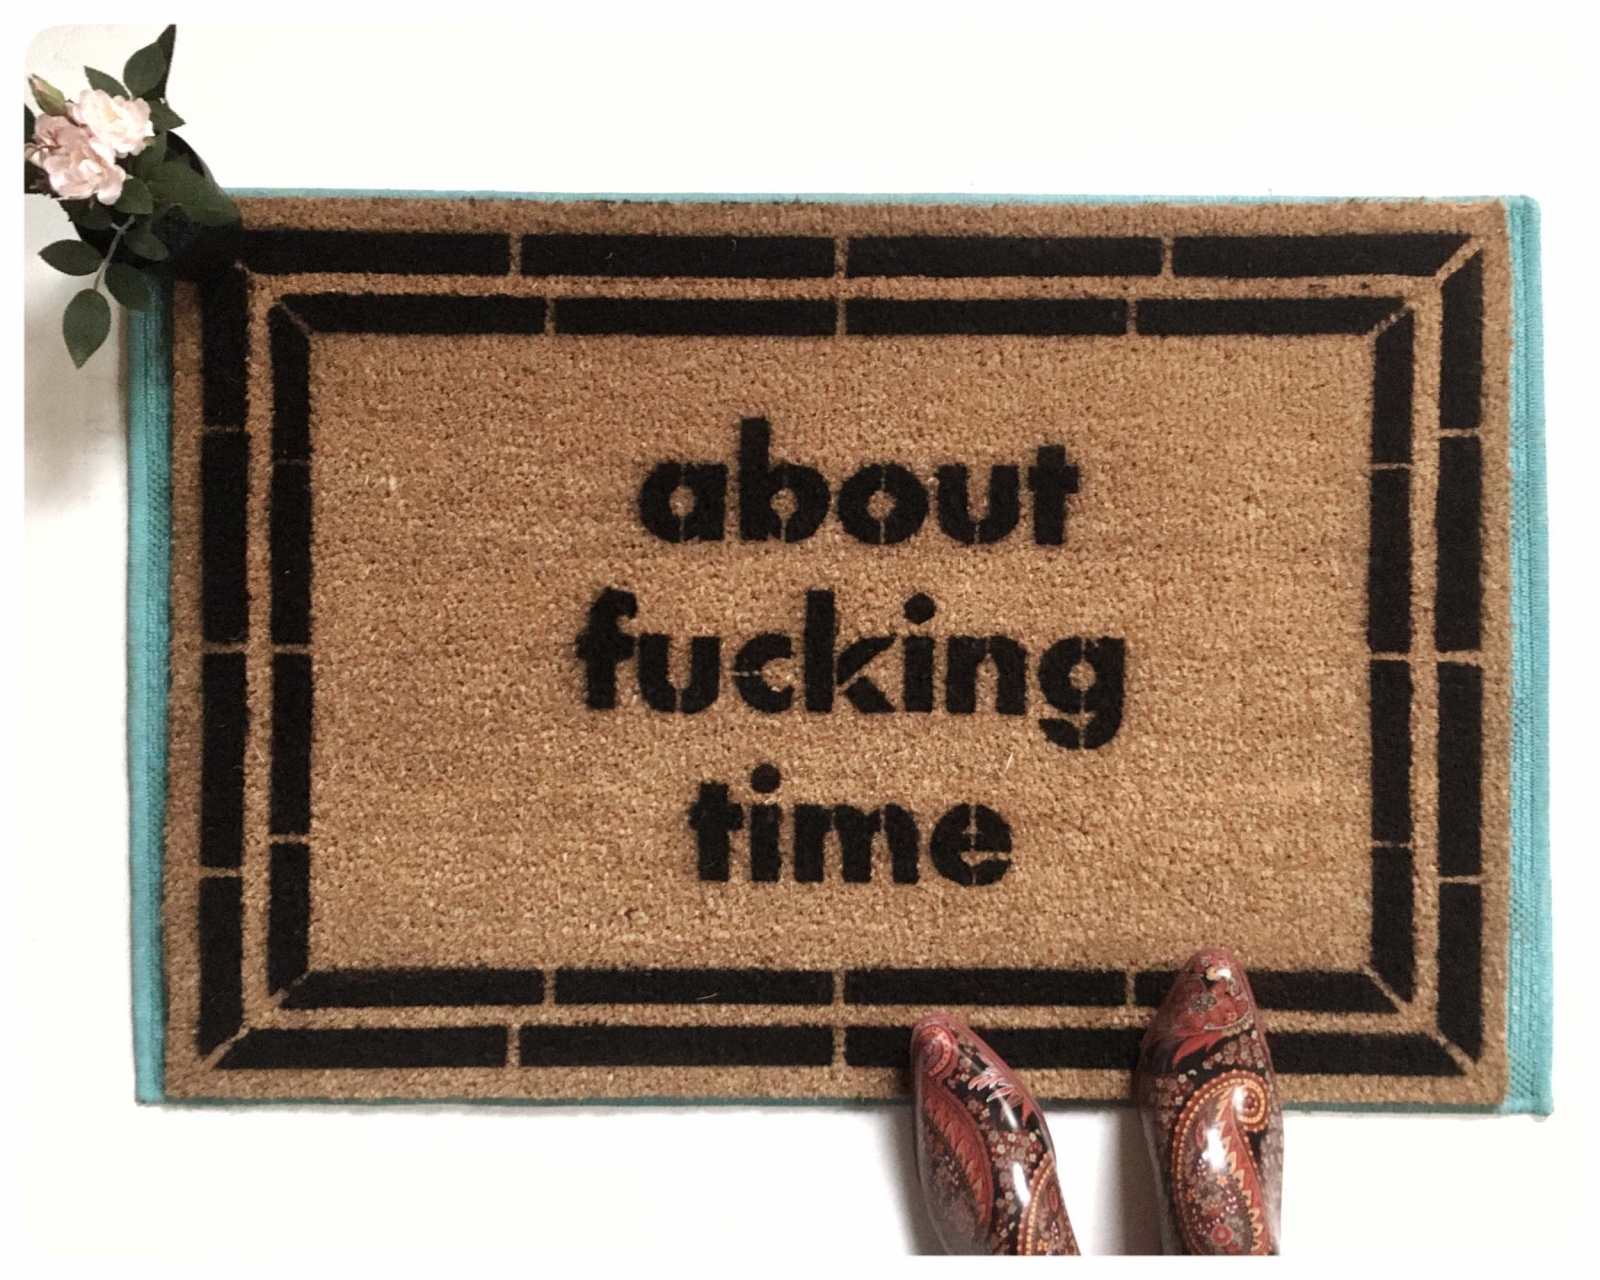 about fucking time F Bomb funny offensive rude doormat go away sign gifts for him FREE us shipping